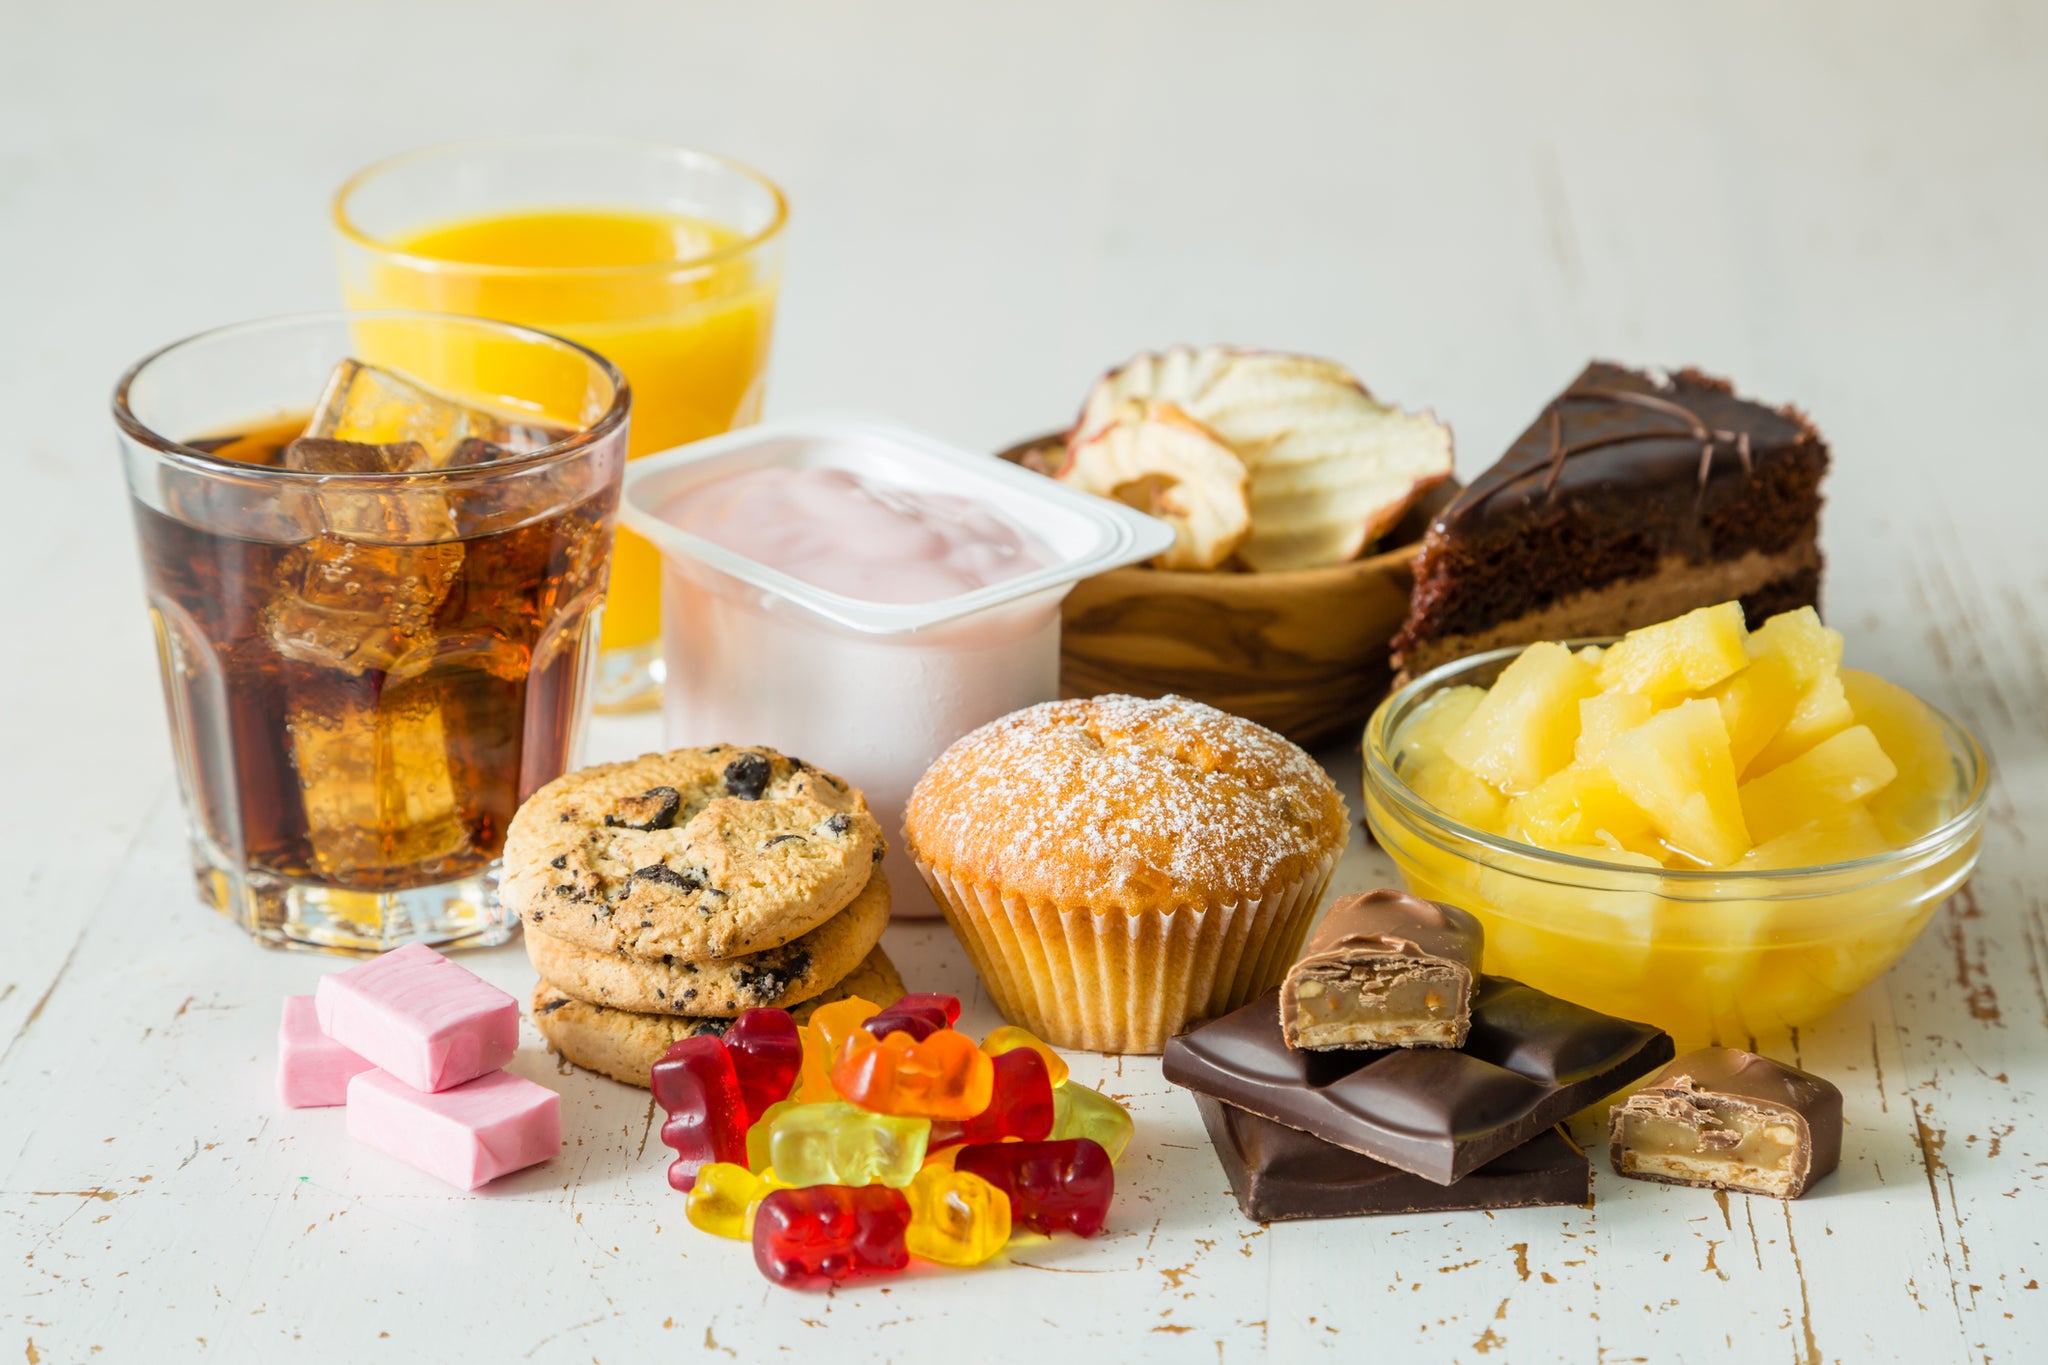 Sugar and Inflammation: What Not to Eat